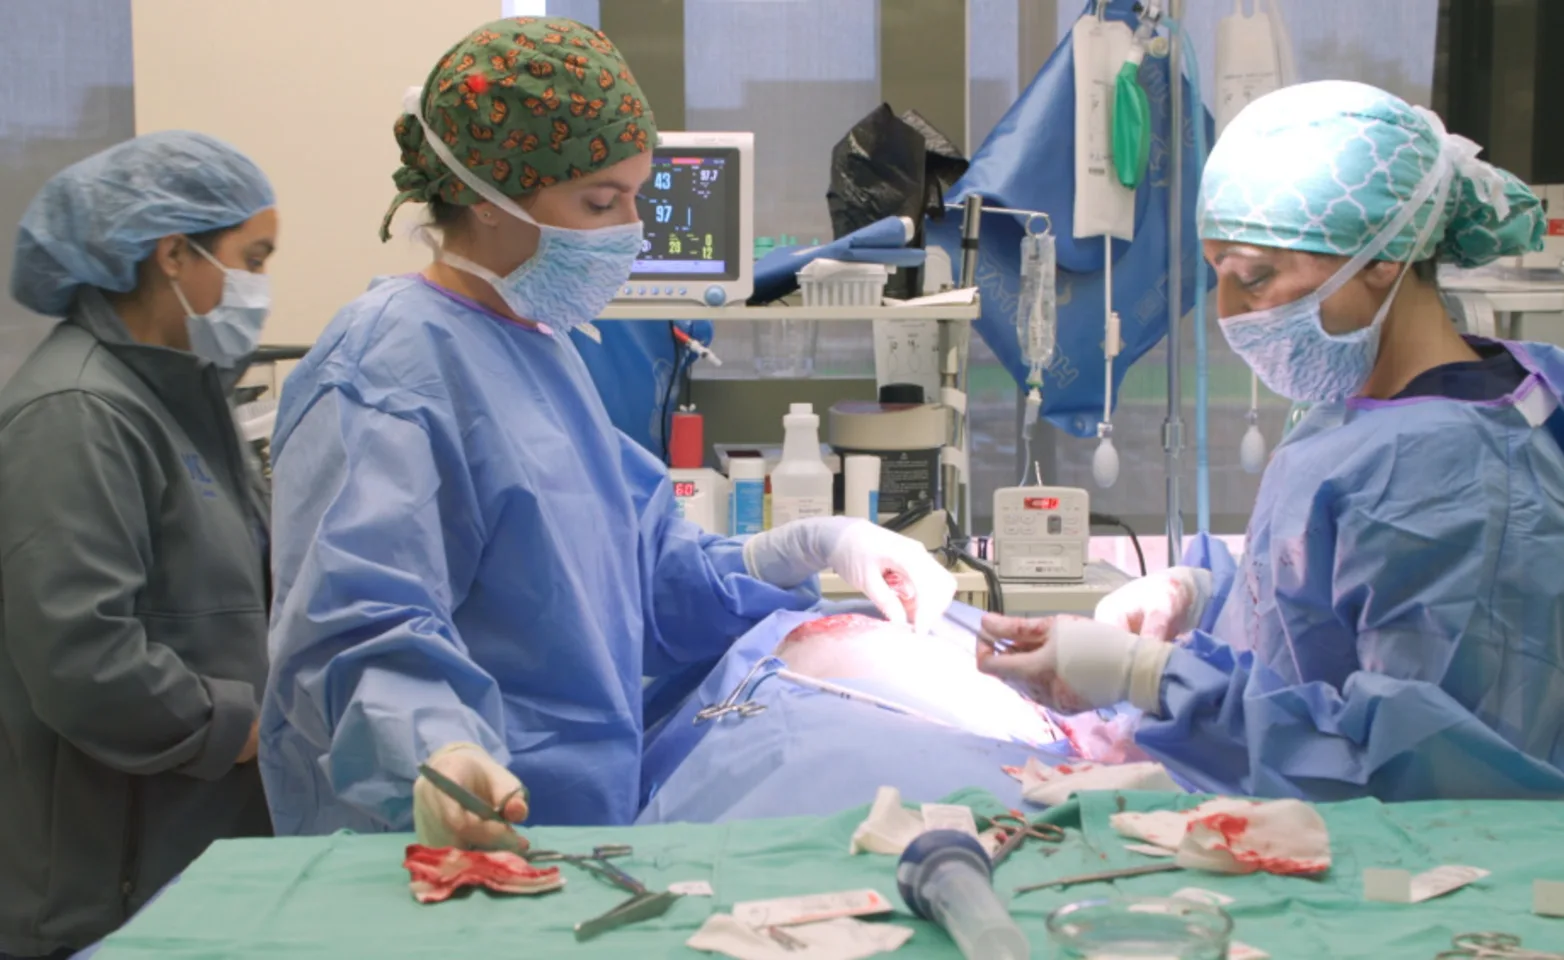 Three staff members dresses in surgical gear performing surgery